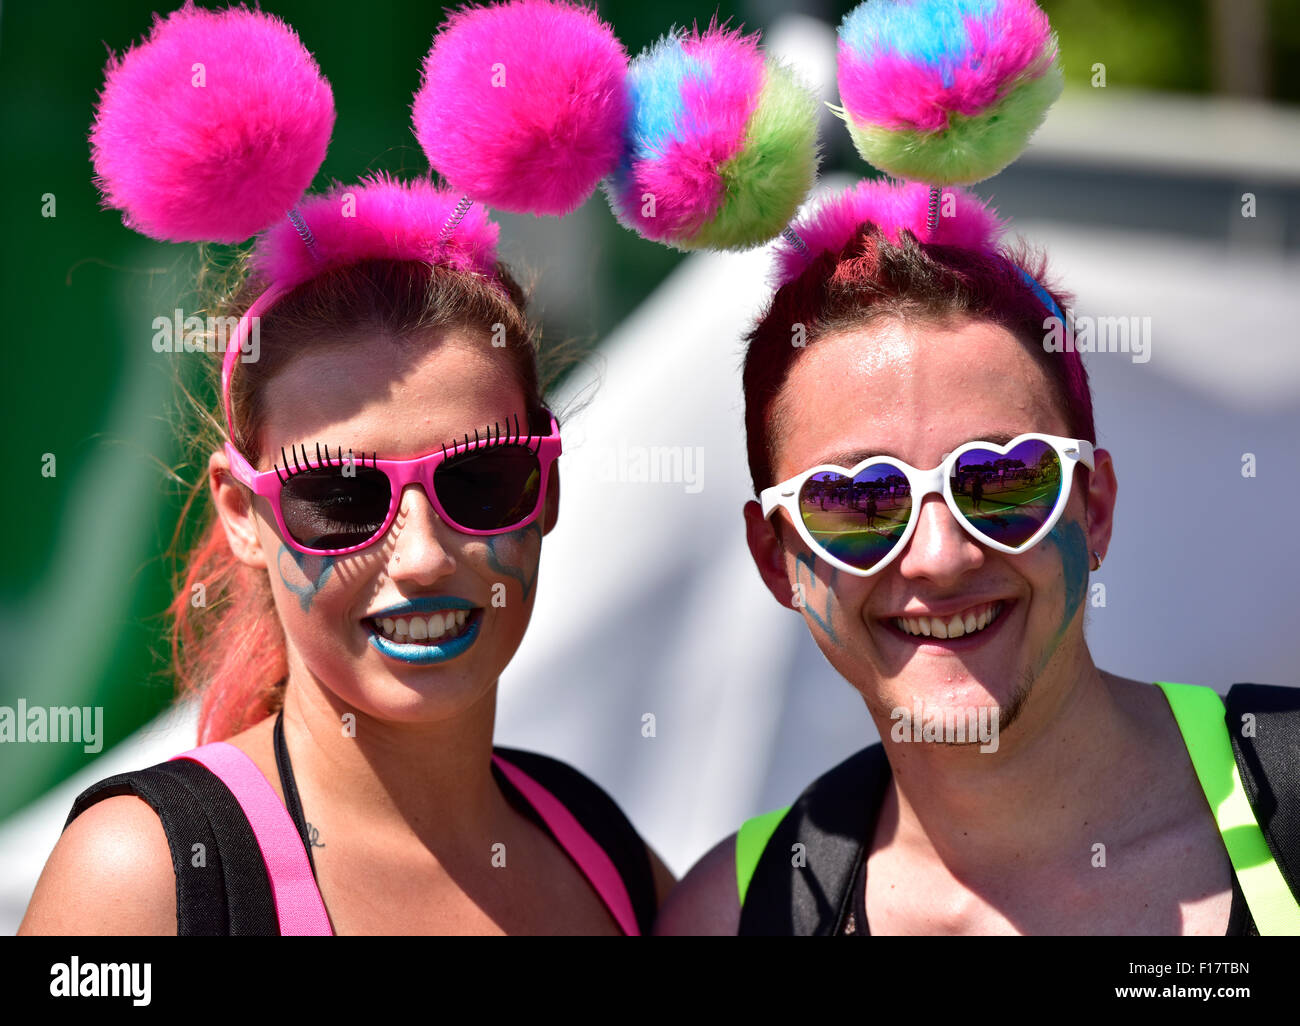 Zurich, Switzerland. 29th Aug, 2015. Partygoers in fancy outfits at Zurich Streetparade, one of the world's largest techno music event. Credit:  Erik Tham/Alamy Live News Stock Photo